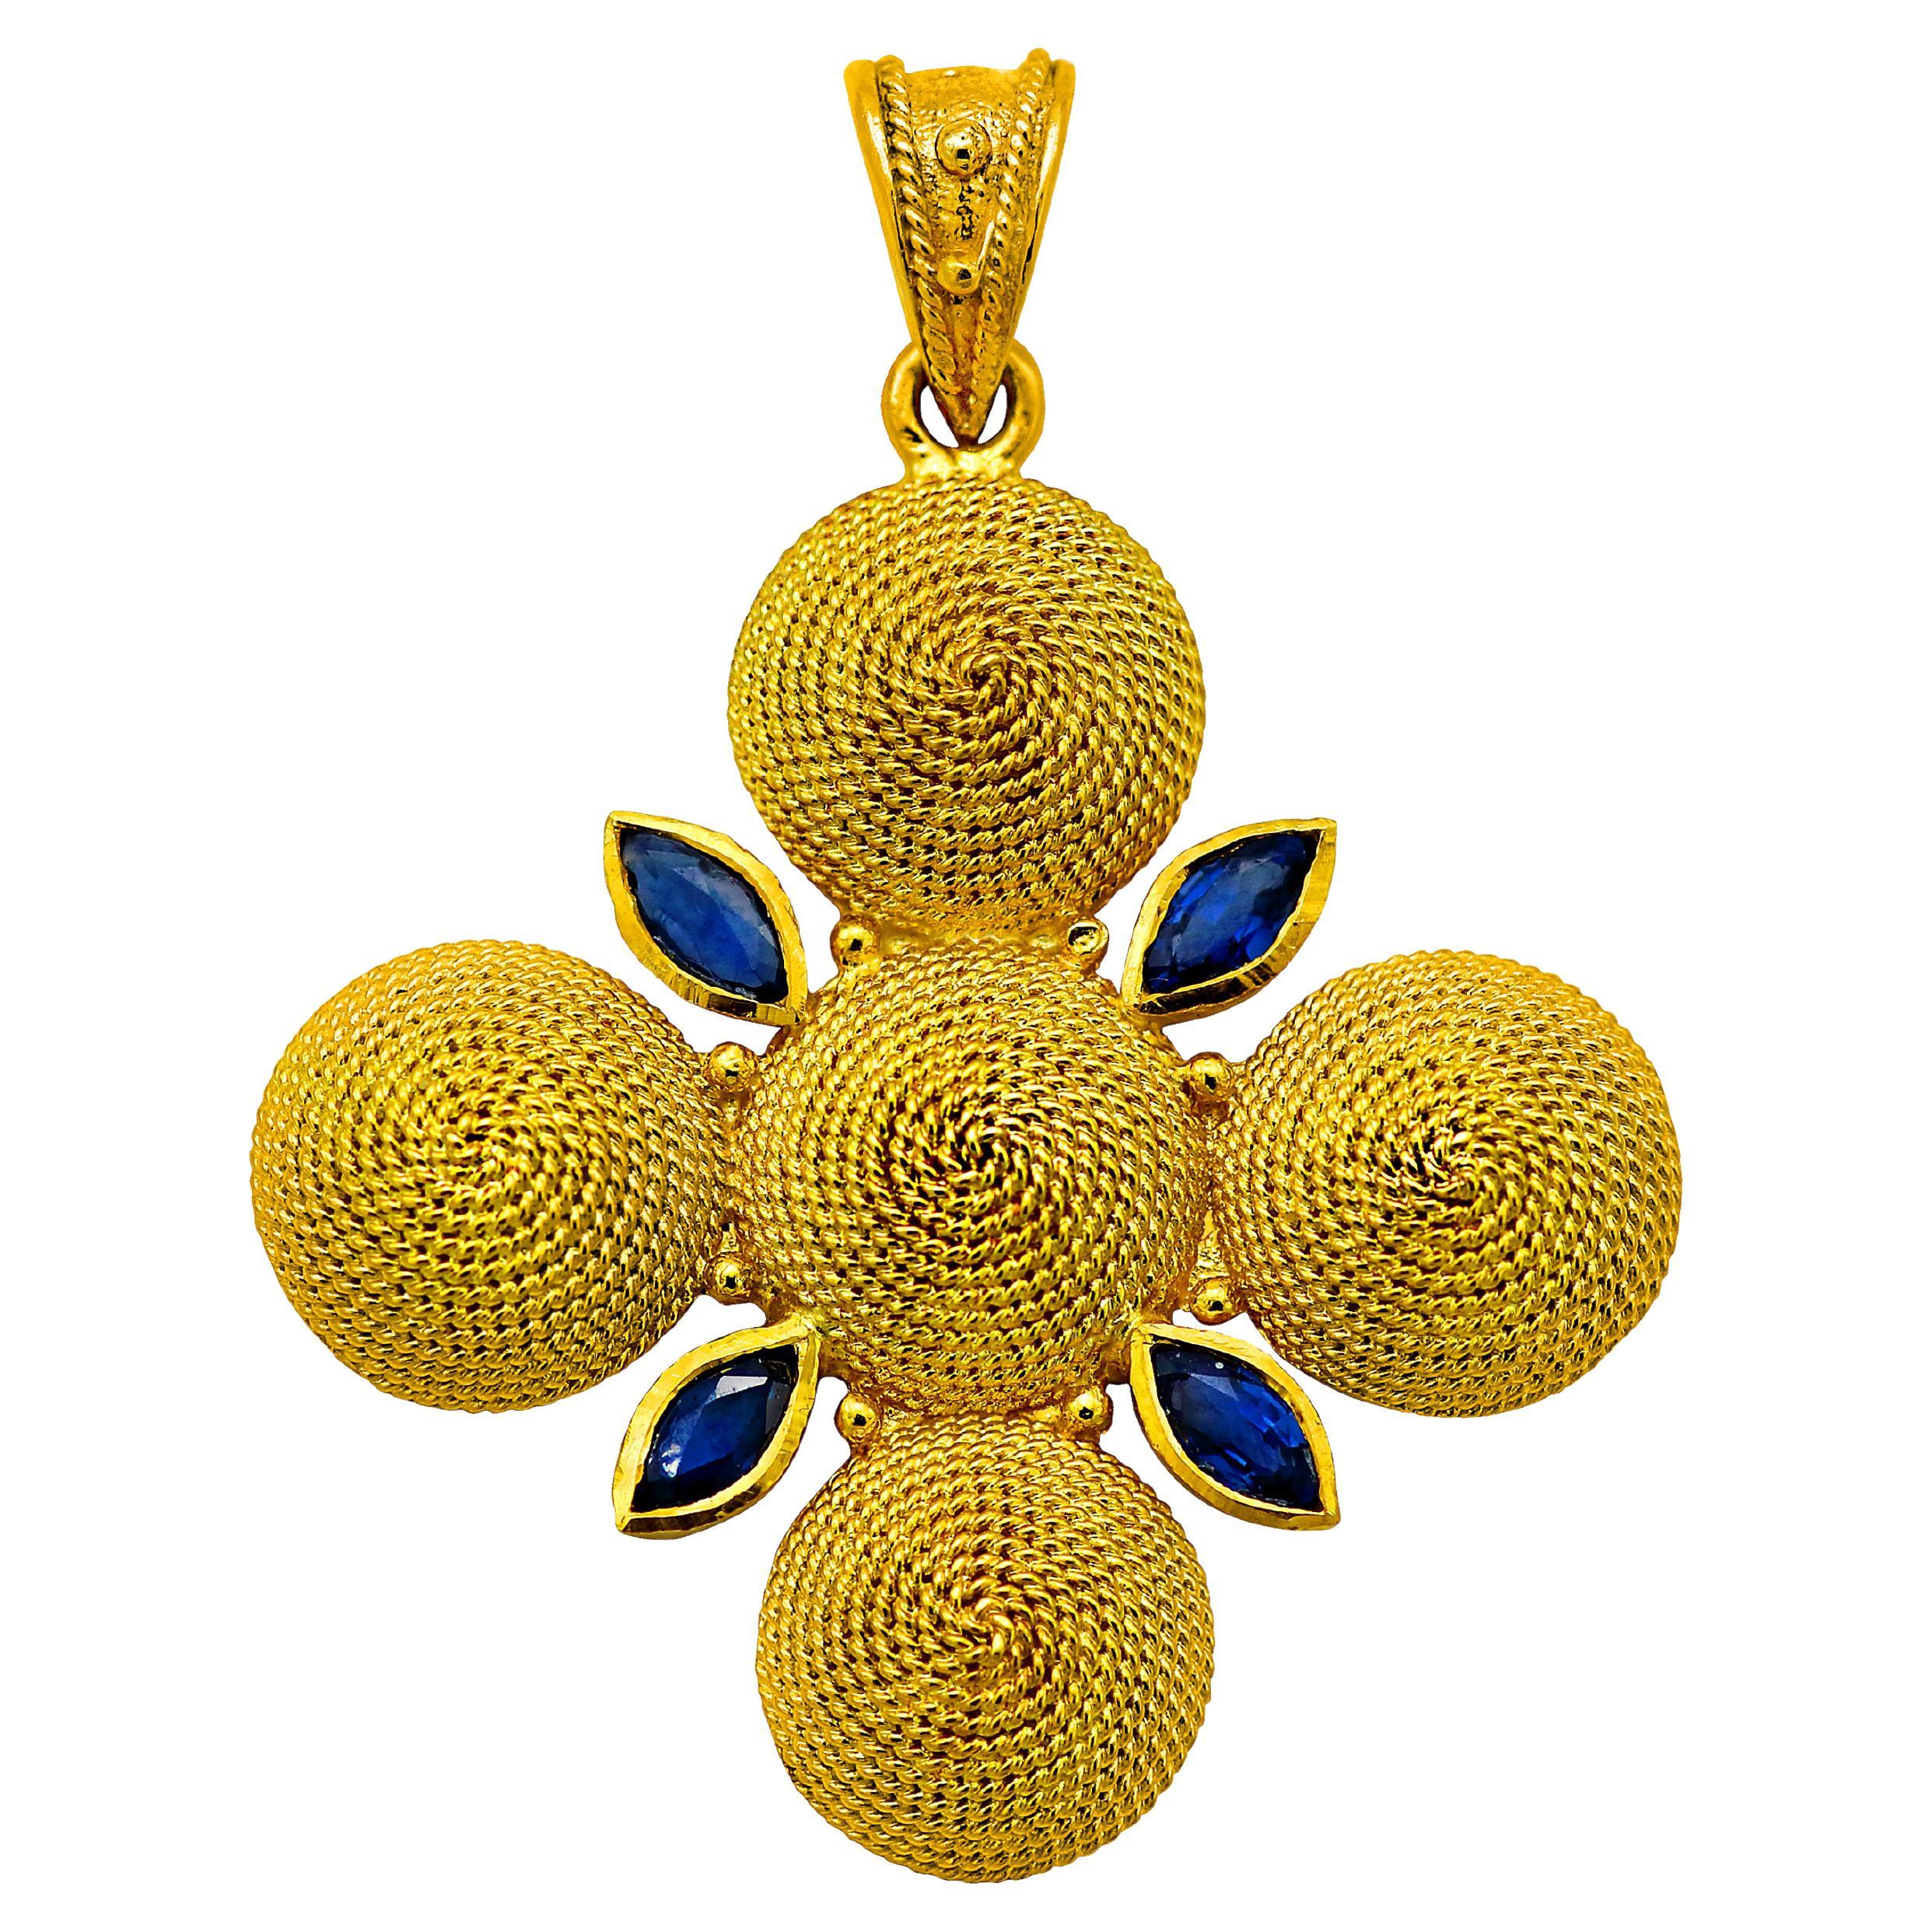 Dimos 18k Gold Filigree Cross Pendant with Marquise Sapphires